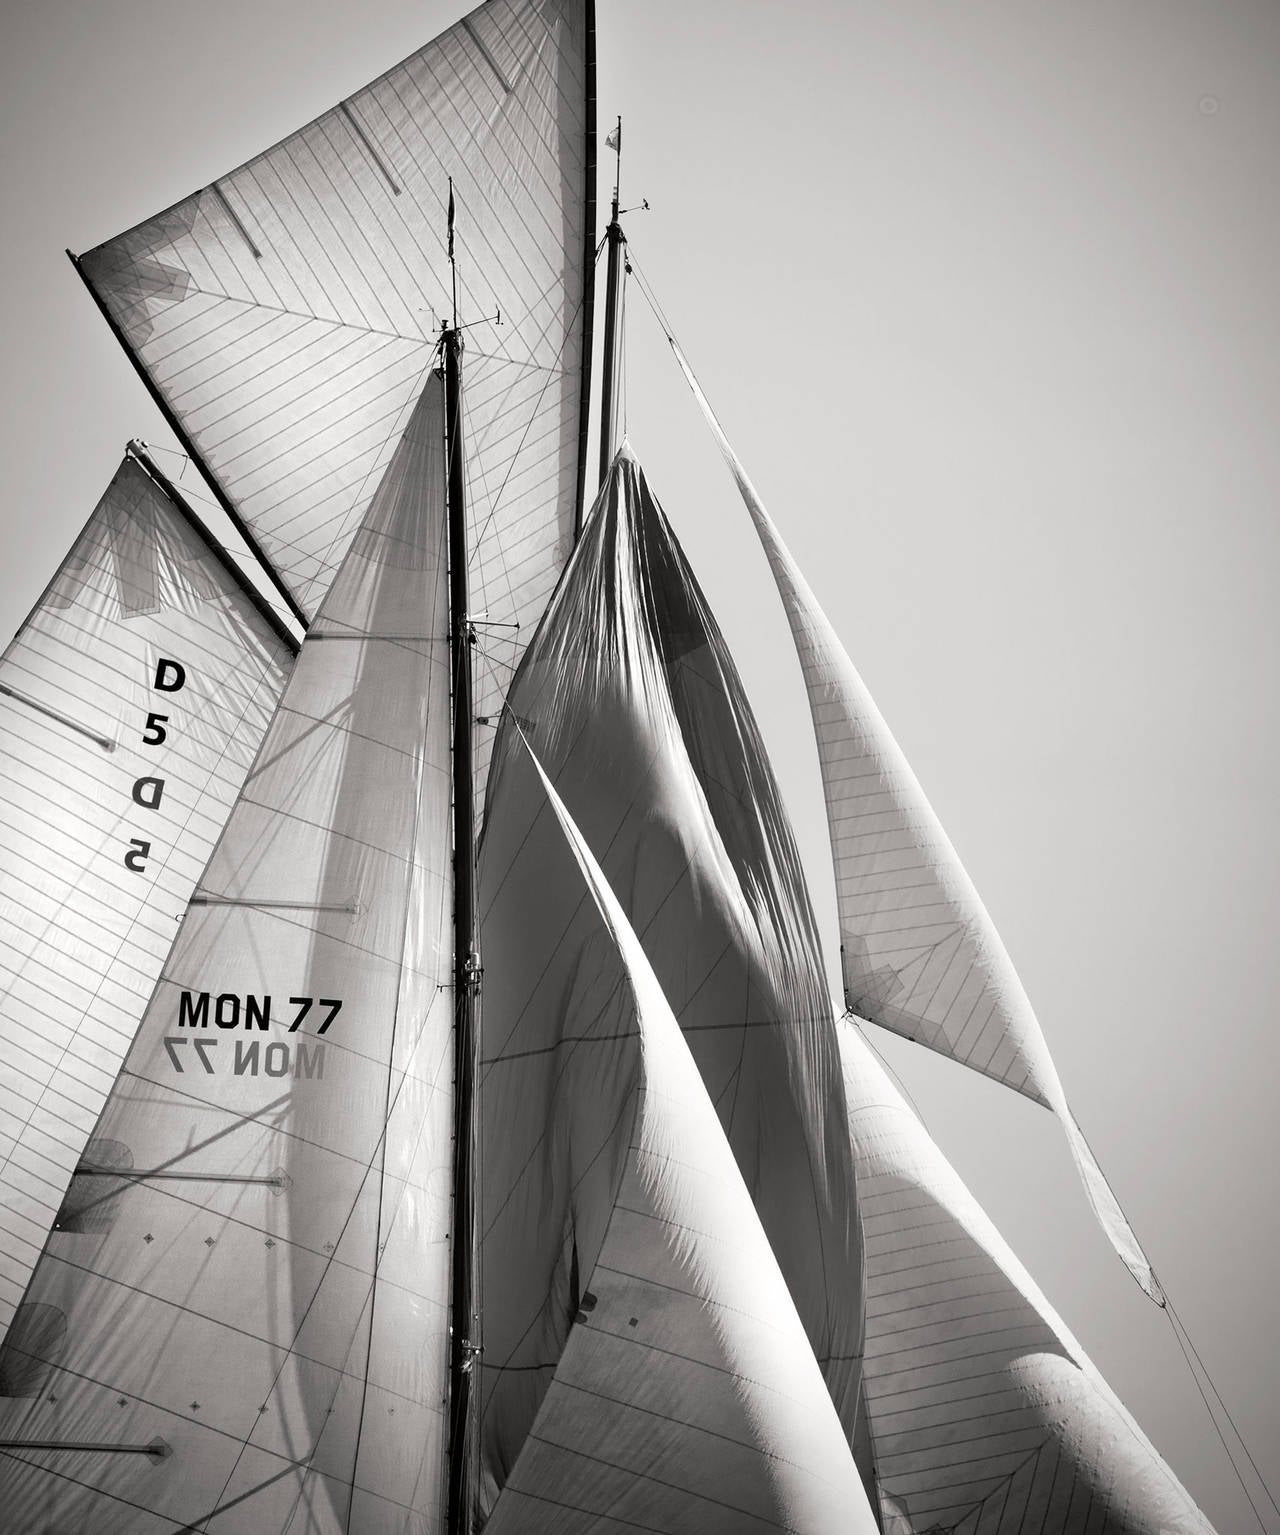 SAILS XII, COTE D'AZUR - Print by Jonathan Chritchley